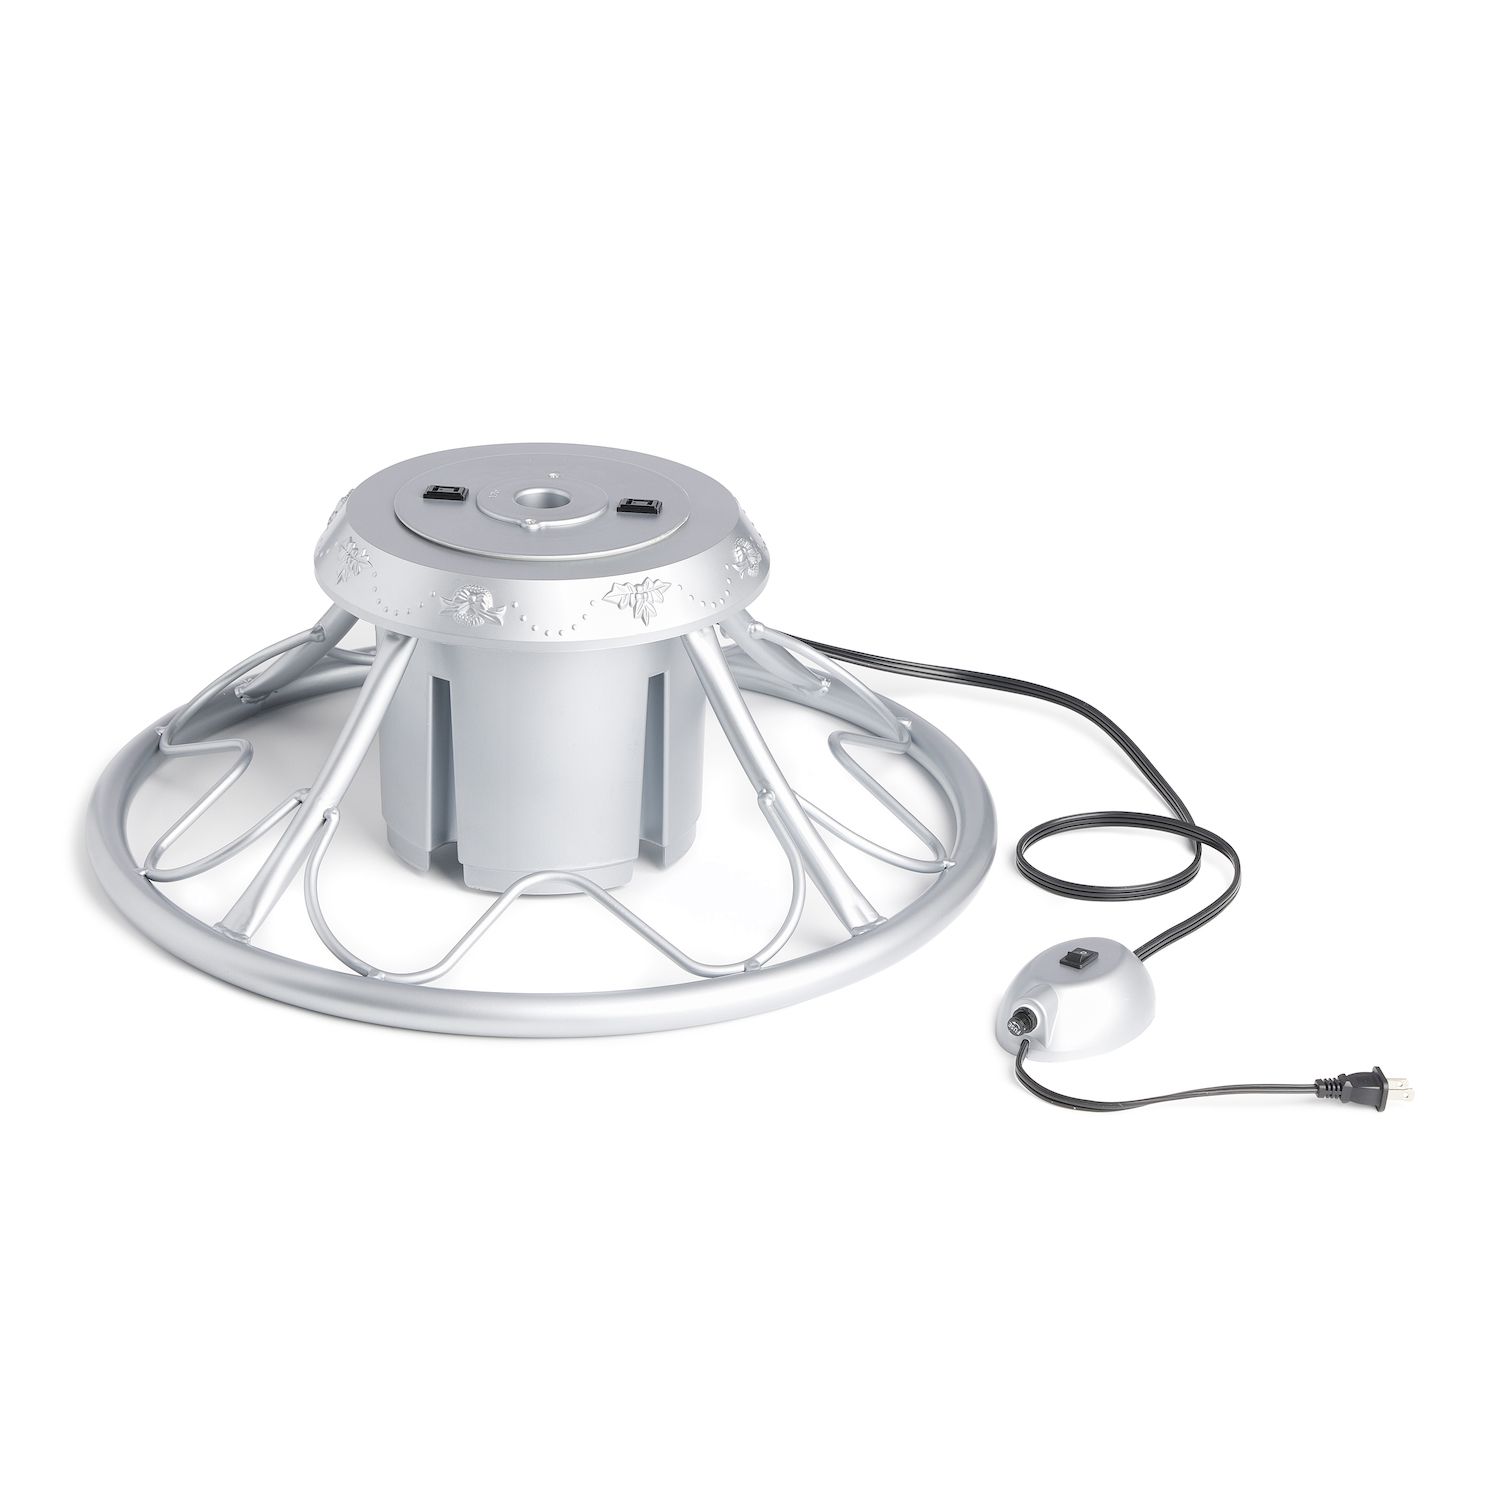 Image for Home Heritage Electric Rotating Stand Base for Artificial Christmas Tree, Silver at Kohl's.